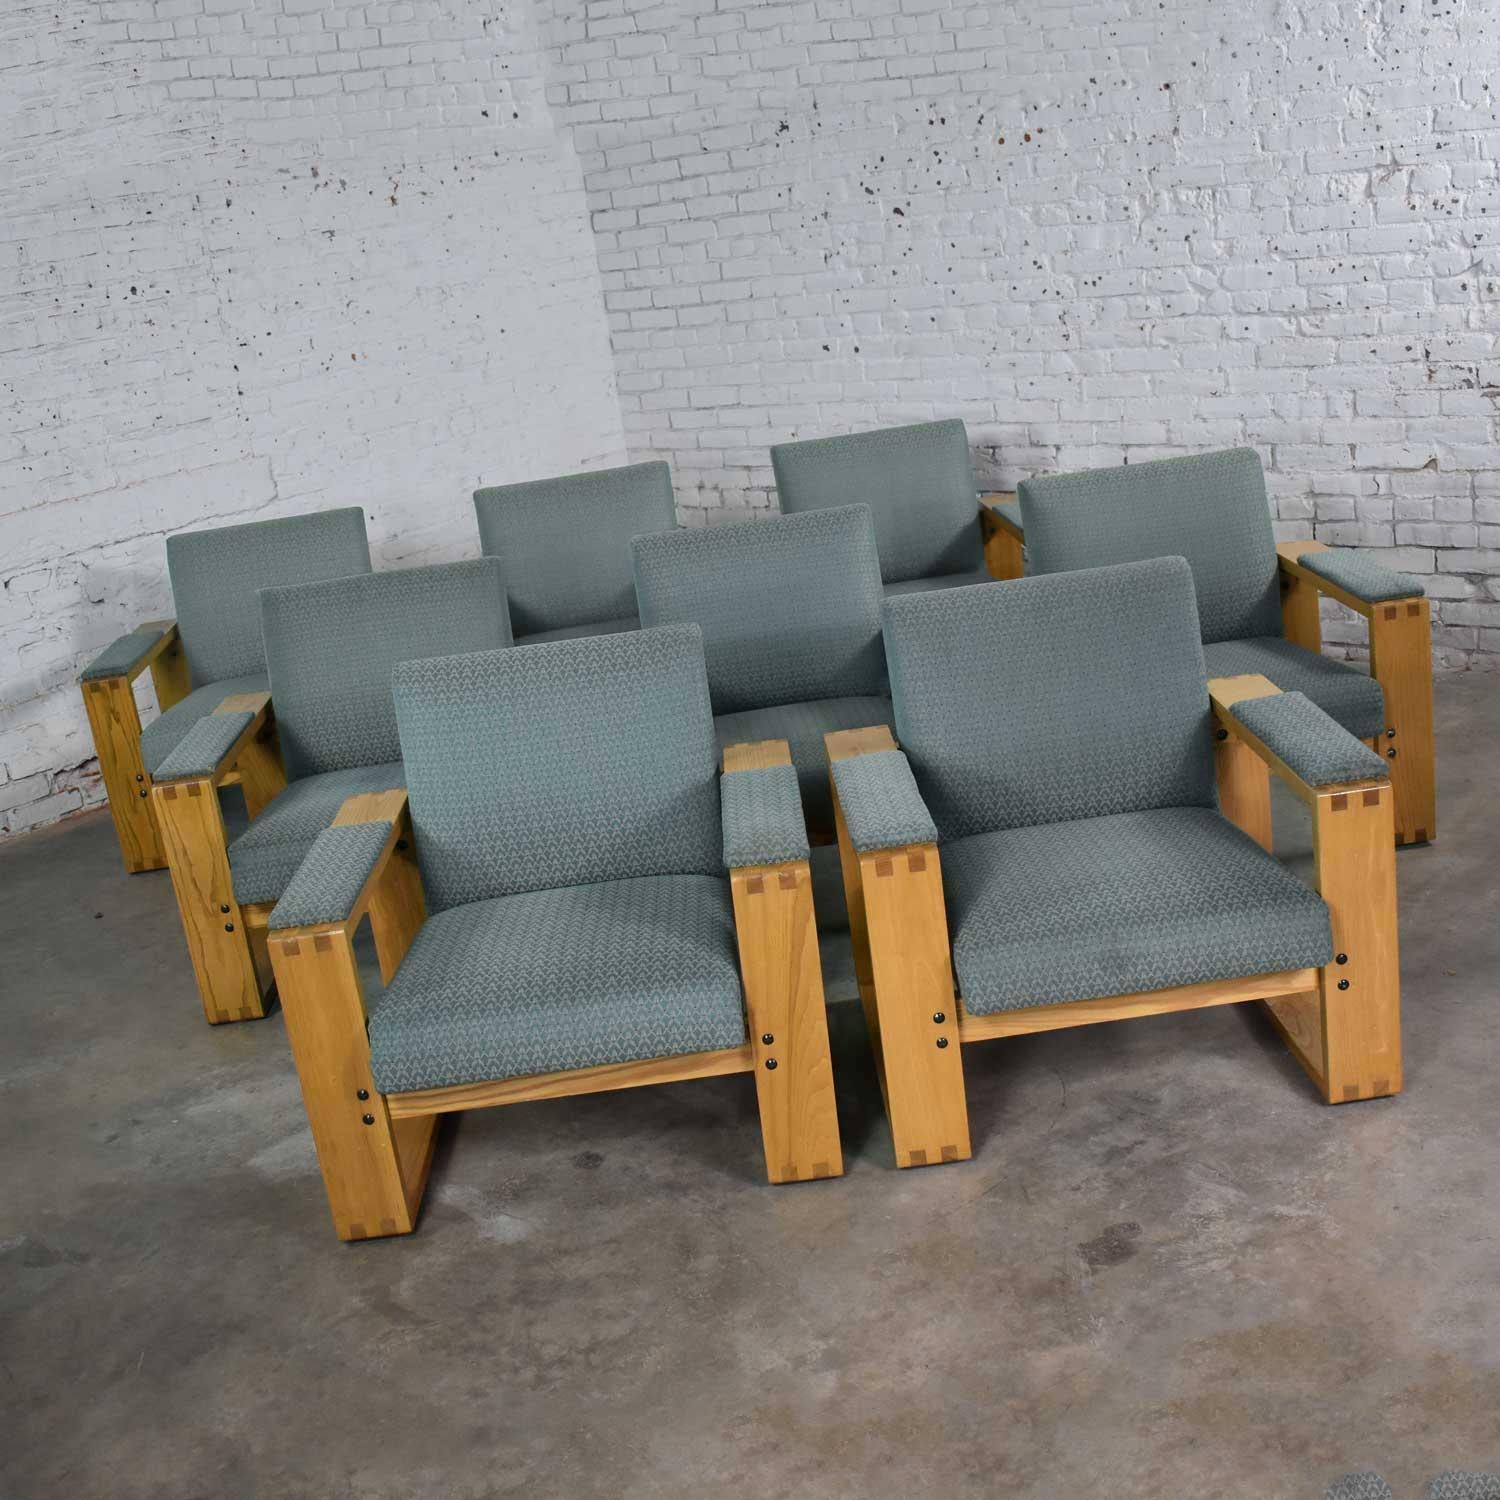 20th Century Modern Open Frame Club Chair with Floating Seat and Back in Oak and Teal Fabric For Sale